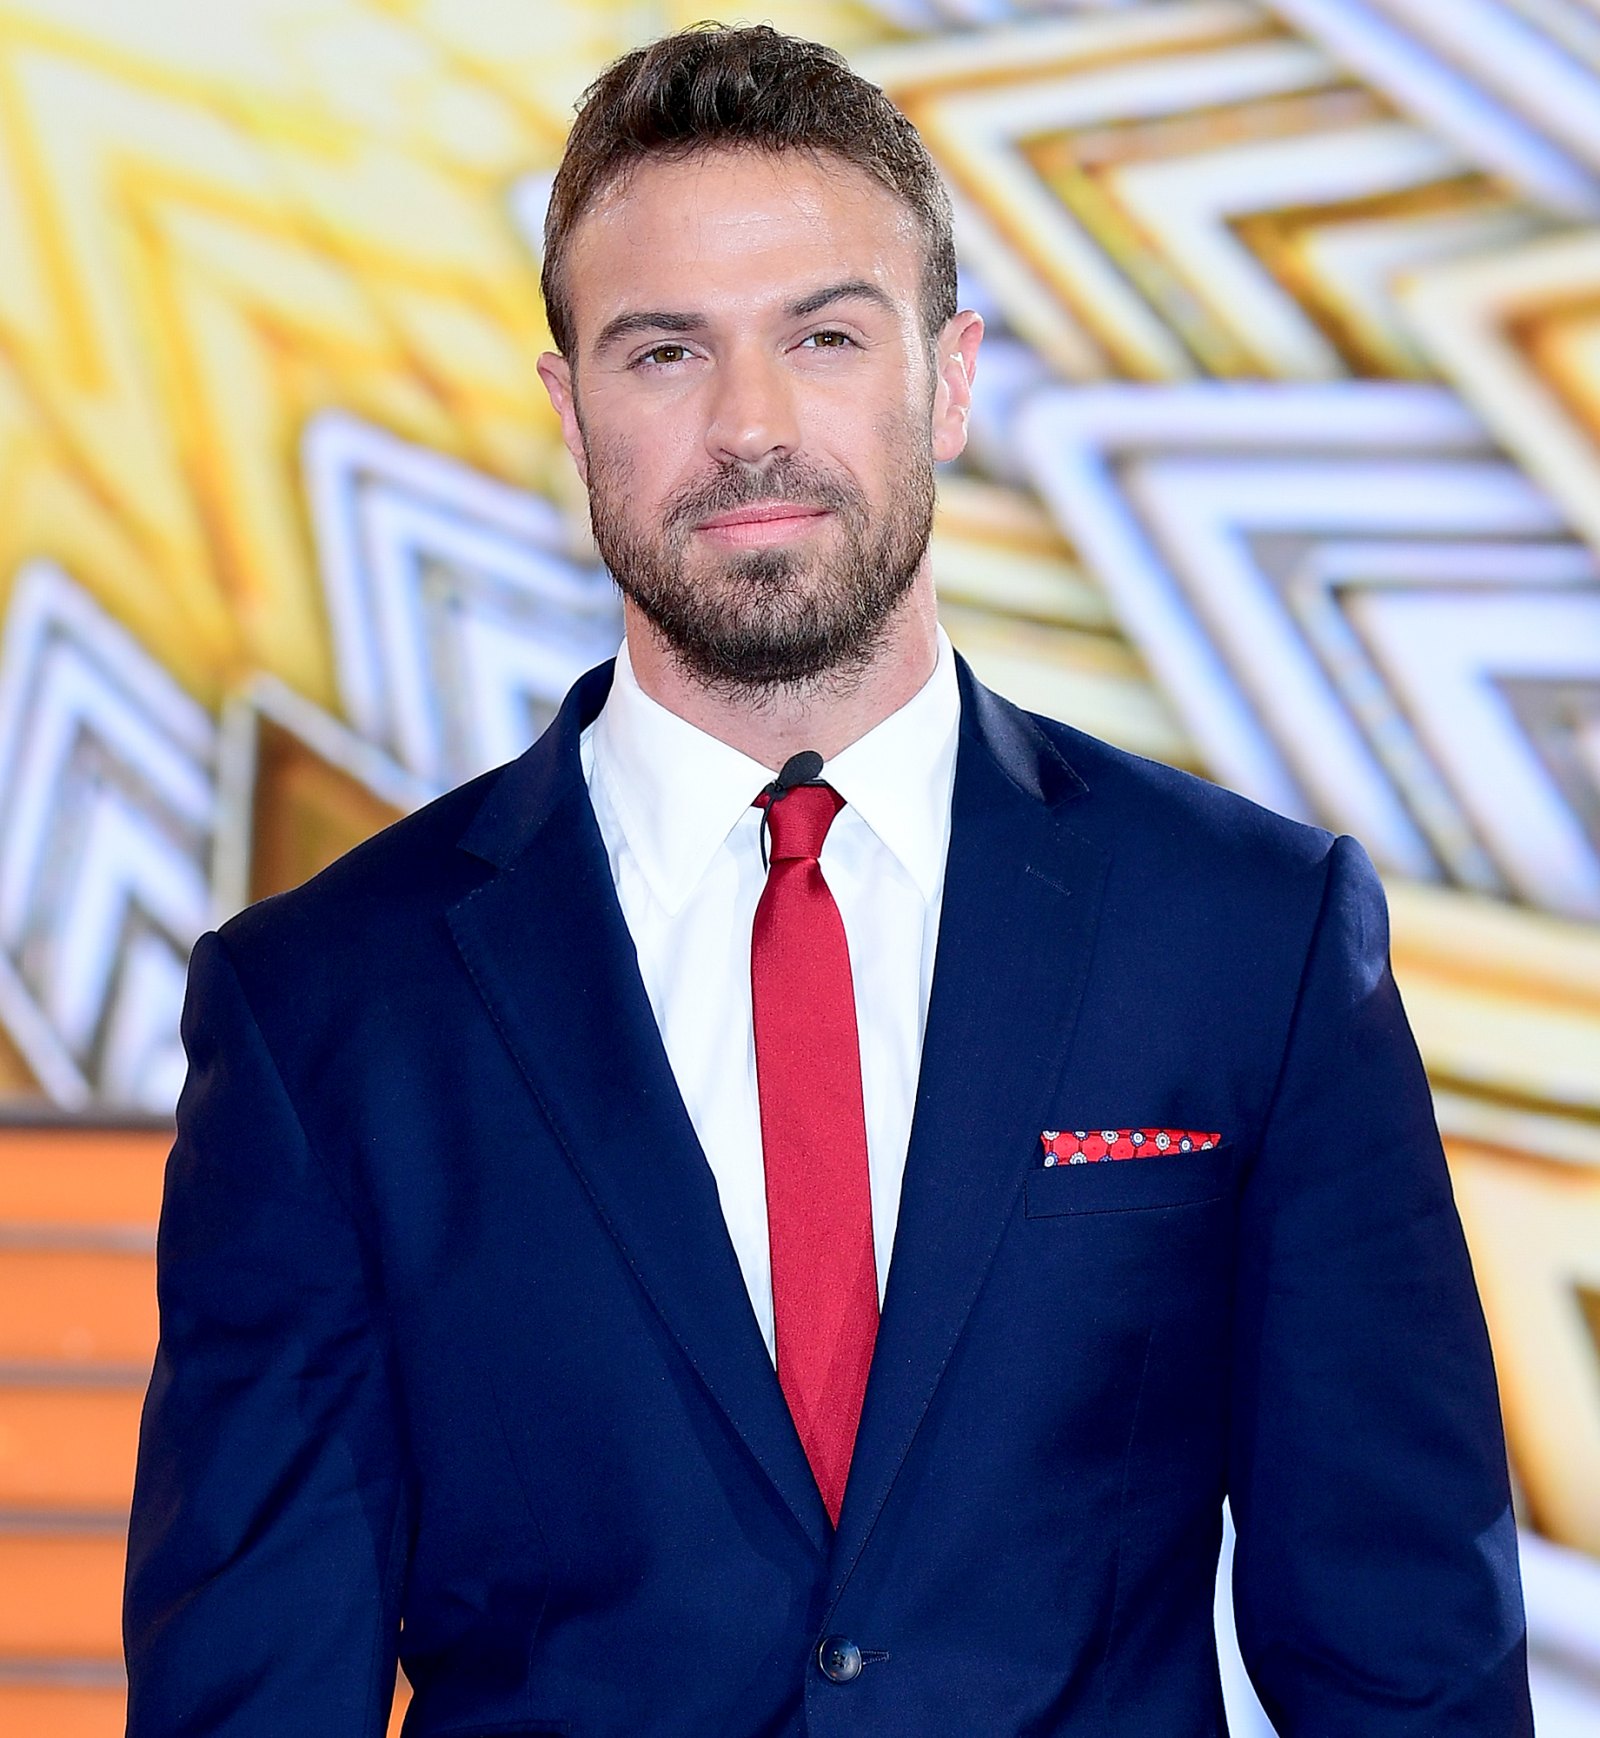 Bachelorette's Chad Johnson Needed 'Welfare Check' After Arrest Us Weekly